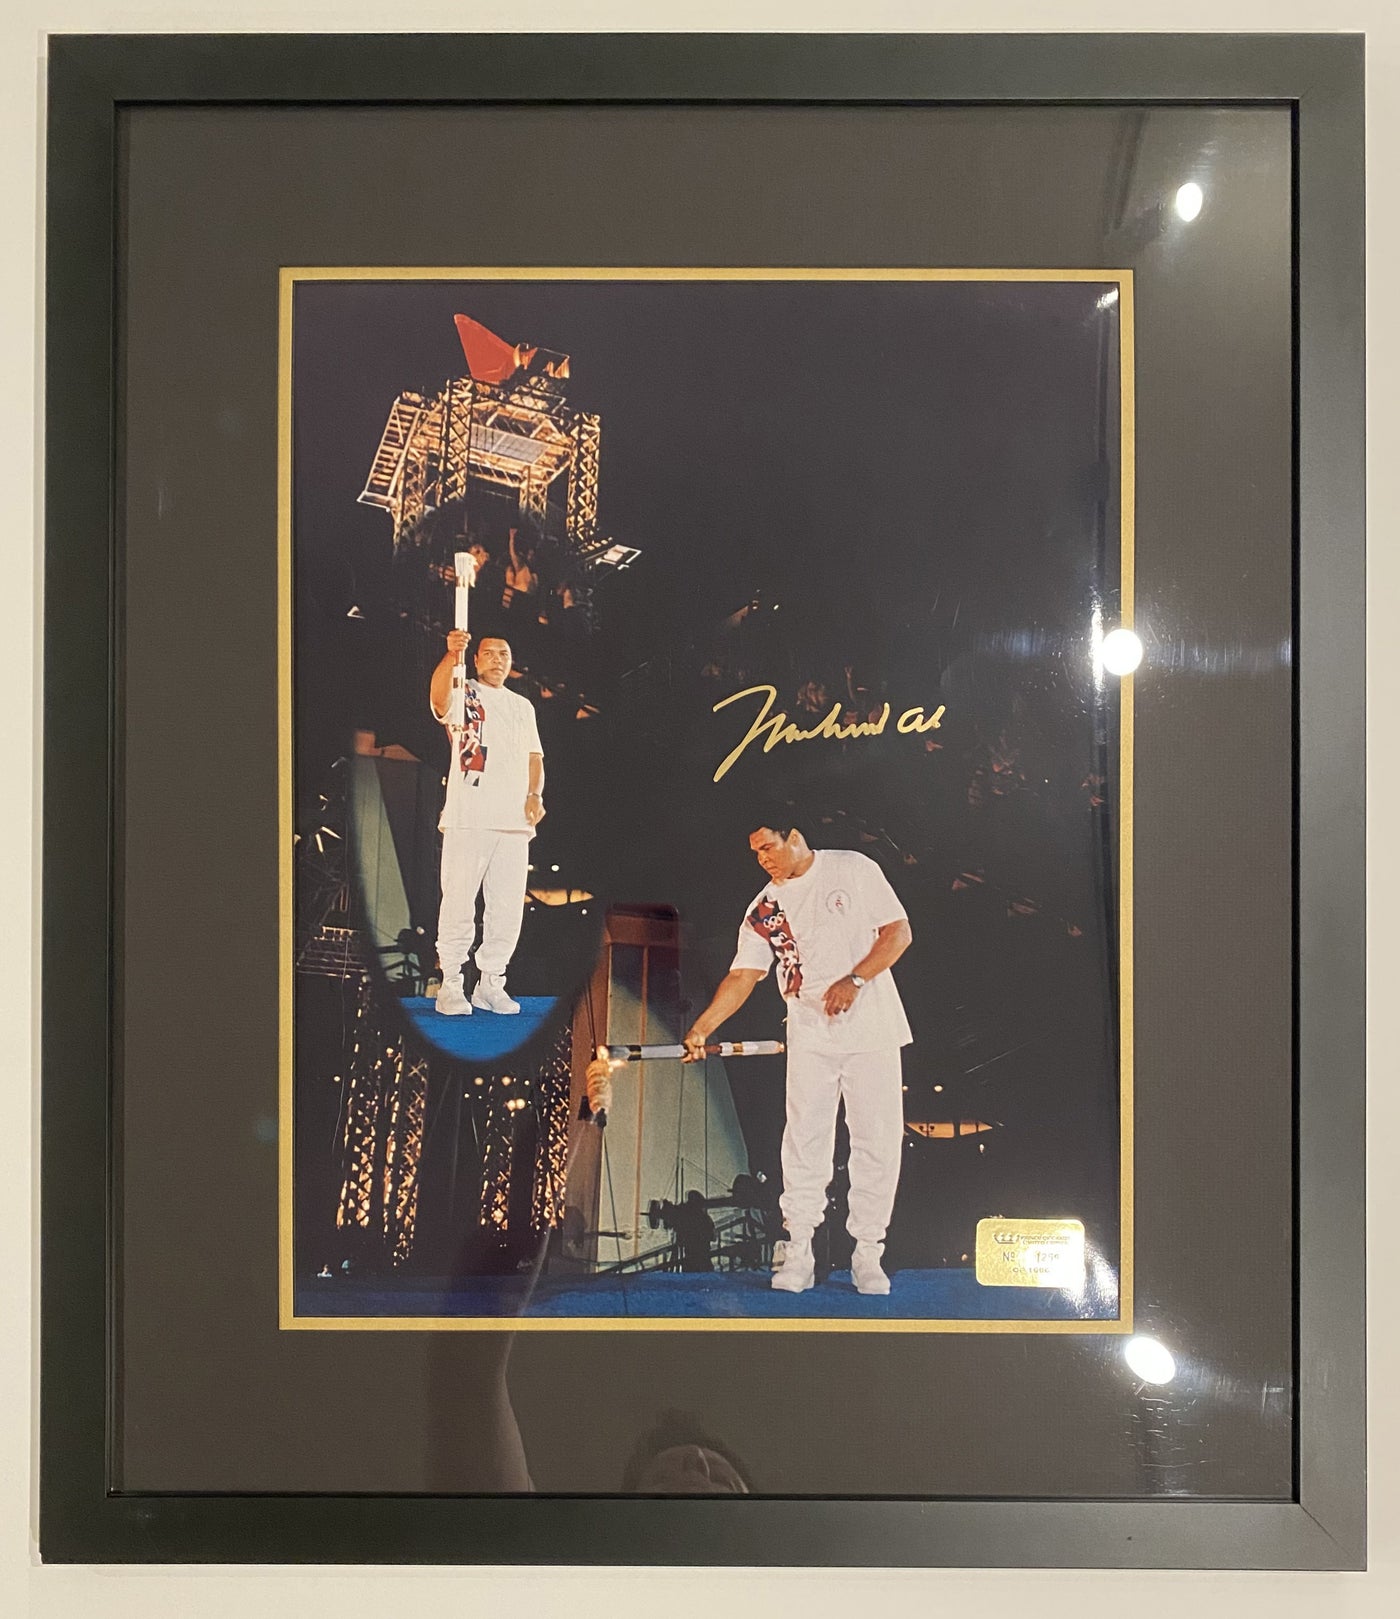 Photograph of Muhammad Ali Lighting 1996 Olympic Torch signed by Muhammad Ali